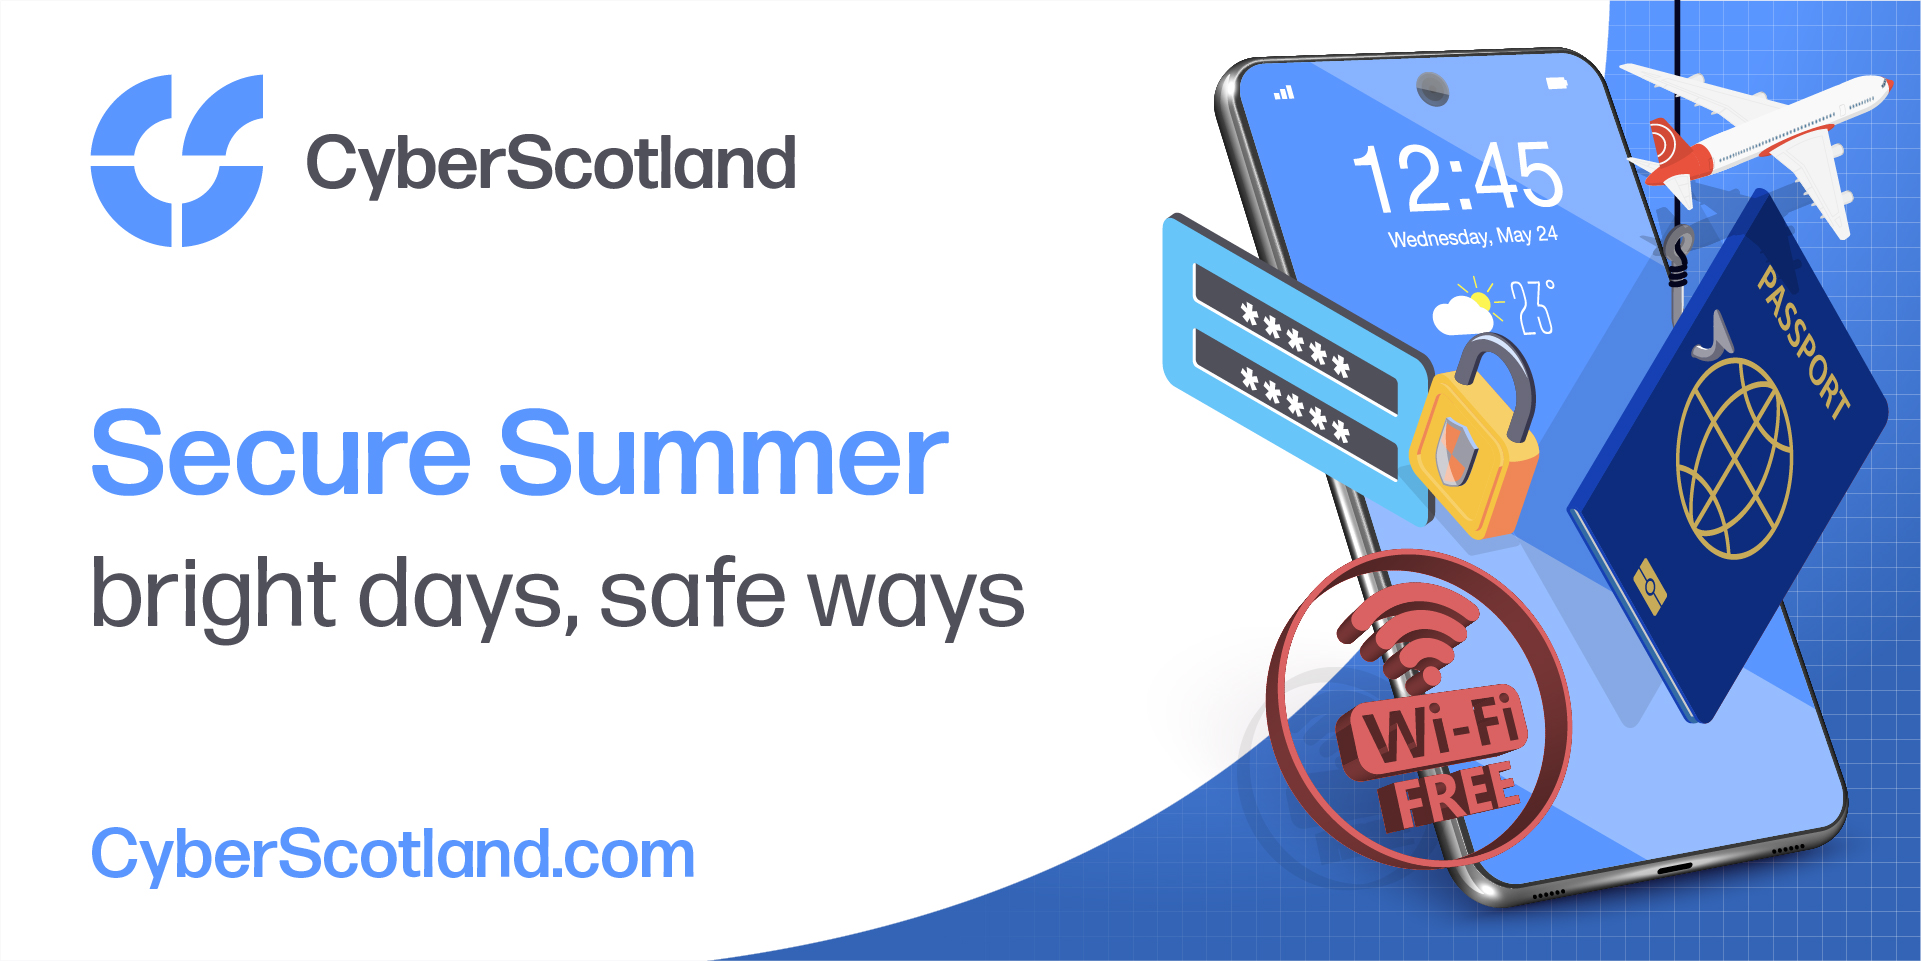 New Secure Summer campaign launched by the CyberScotland Partnership